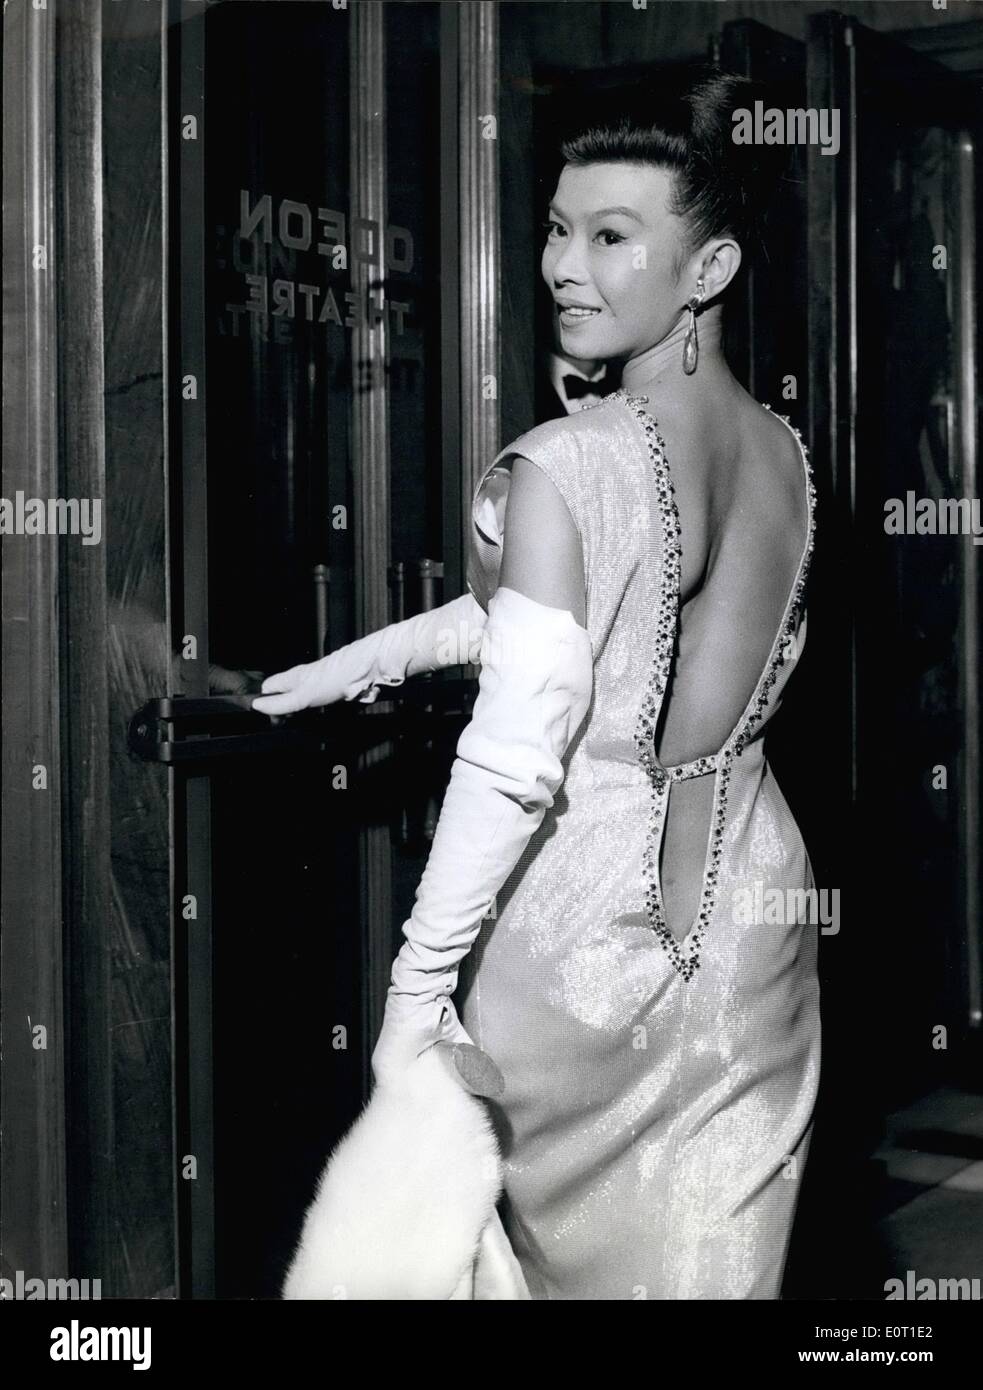 Jun. 24, 1960 - 24-6-60 Deep backed fashion at Premiere. The premiere took place last night at the Odeon, Leicester Square, of the film The Savage Innocents . Photo Shows: Miss Yoko Tani, star of the film, wore this very deep-backed dress, when she arrived for last night's premiere. Stock Photo